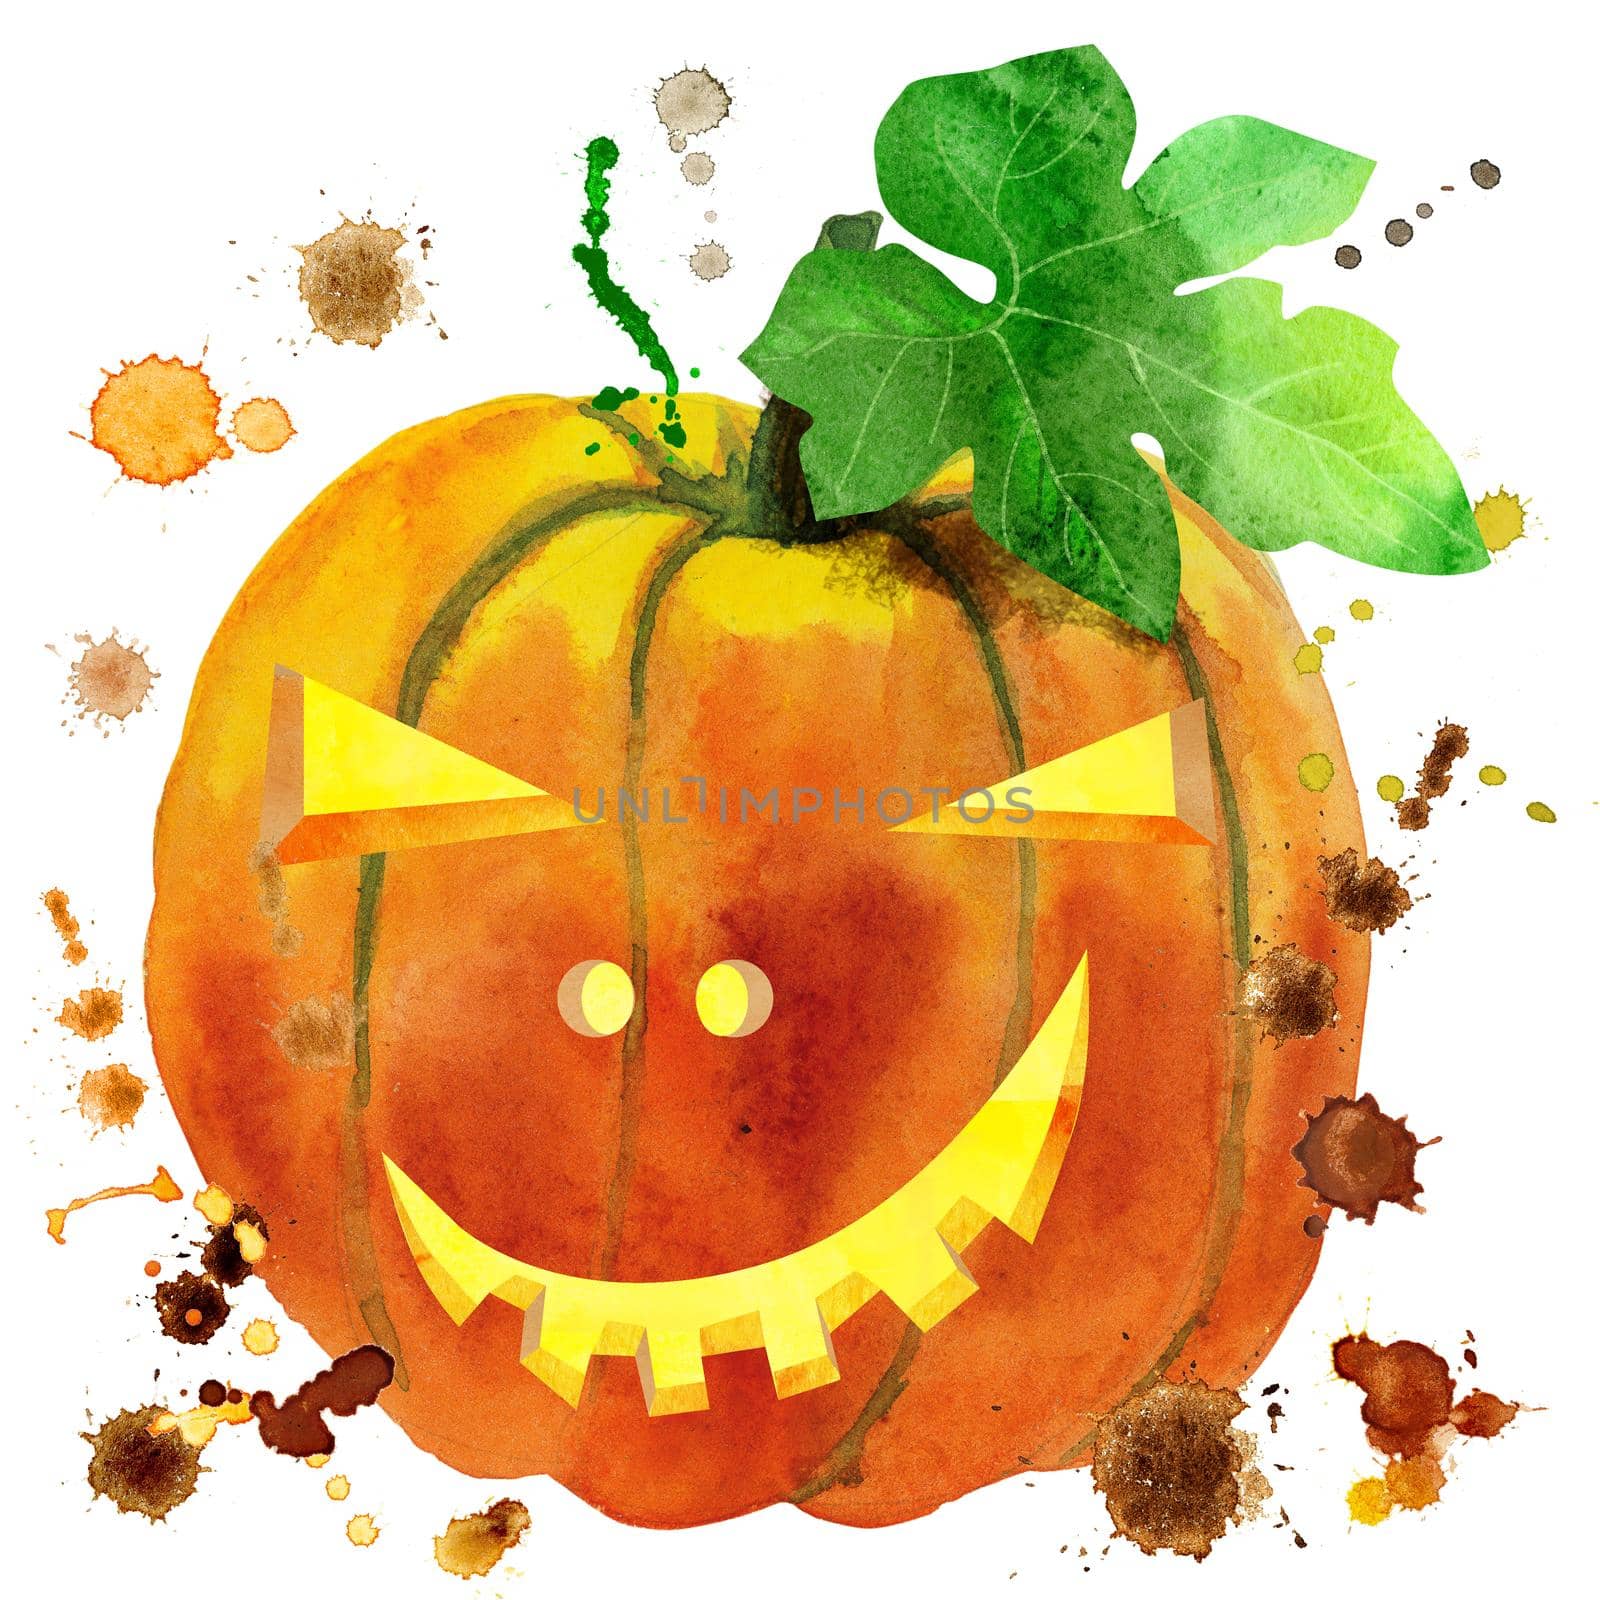 Watercolor halloween pumpkin. Hand painted carved faces pumpkins isolated on white background. Holiday illustration for design, print or background